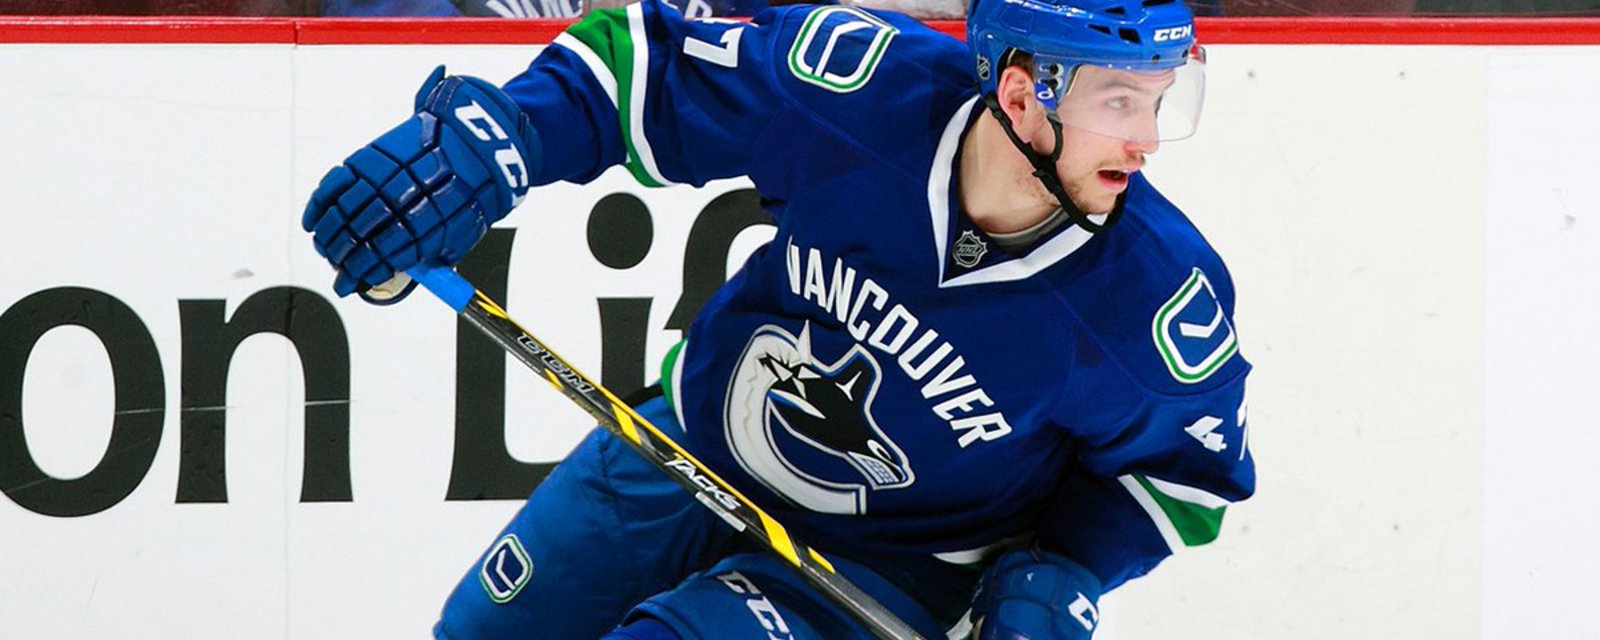 Injury Report: More awful news for the Canucks